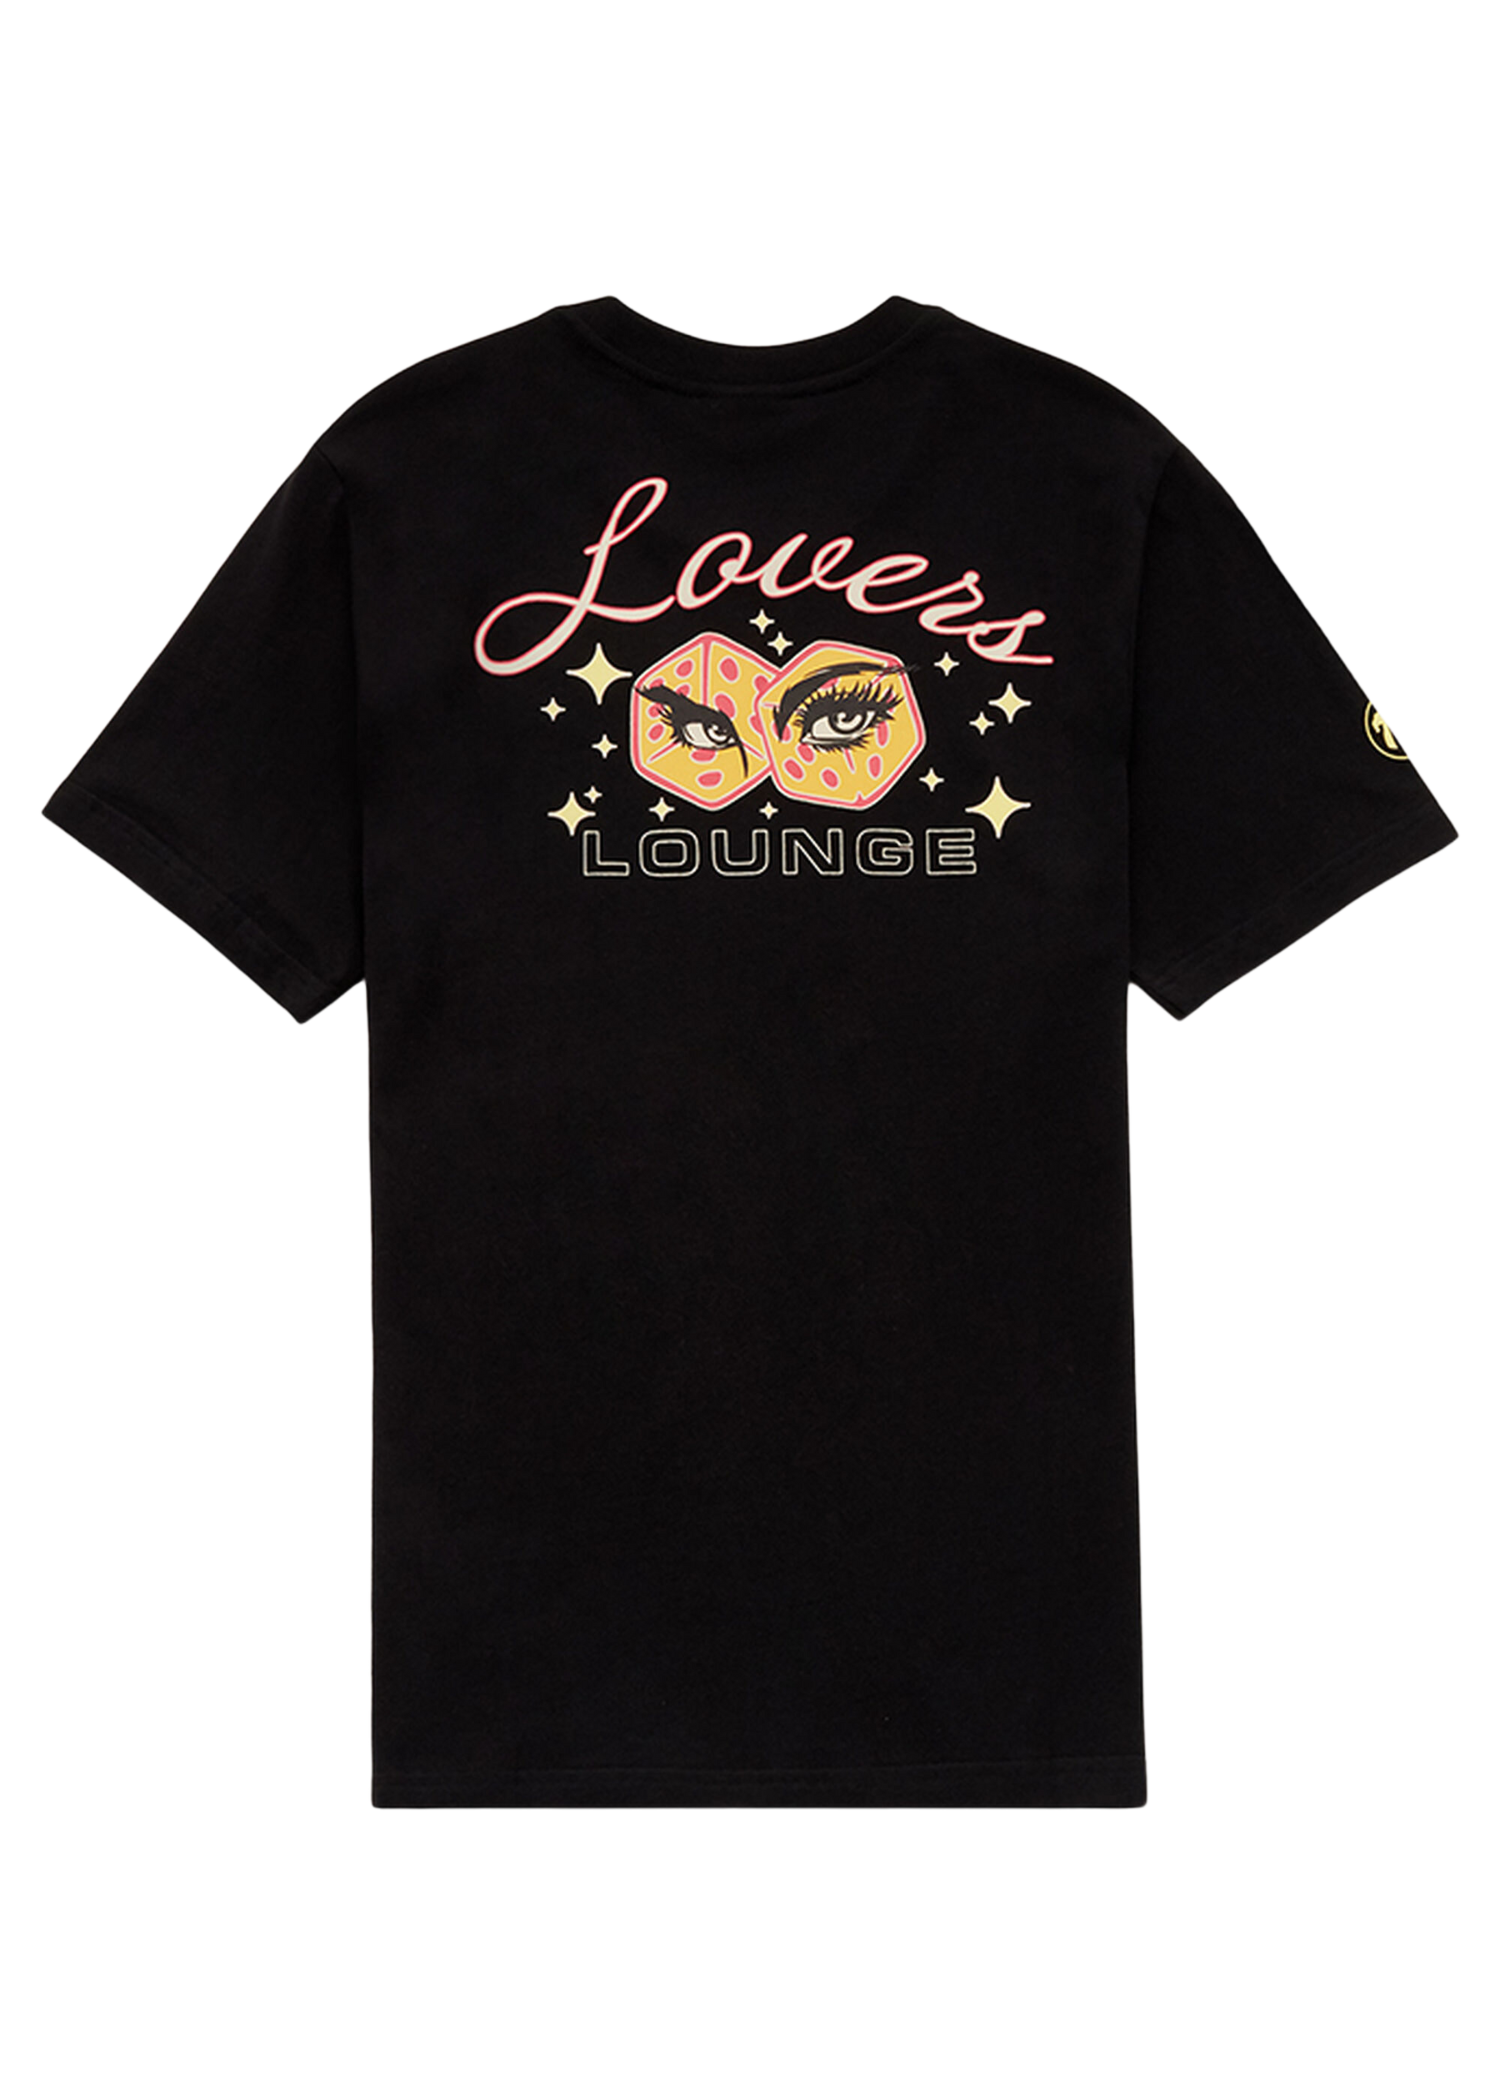 Lovers Lounge Short Sleeve Graphic Tee